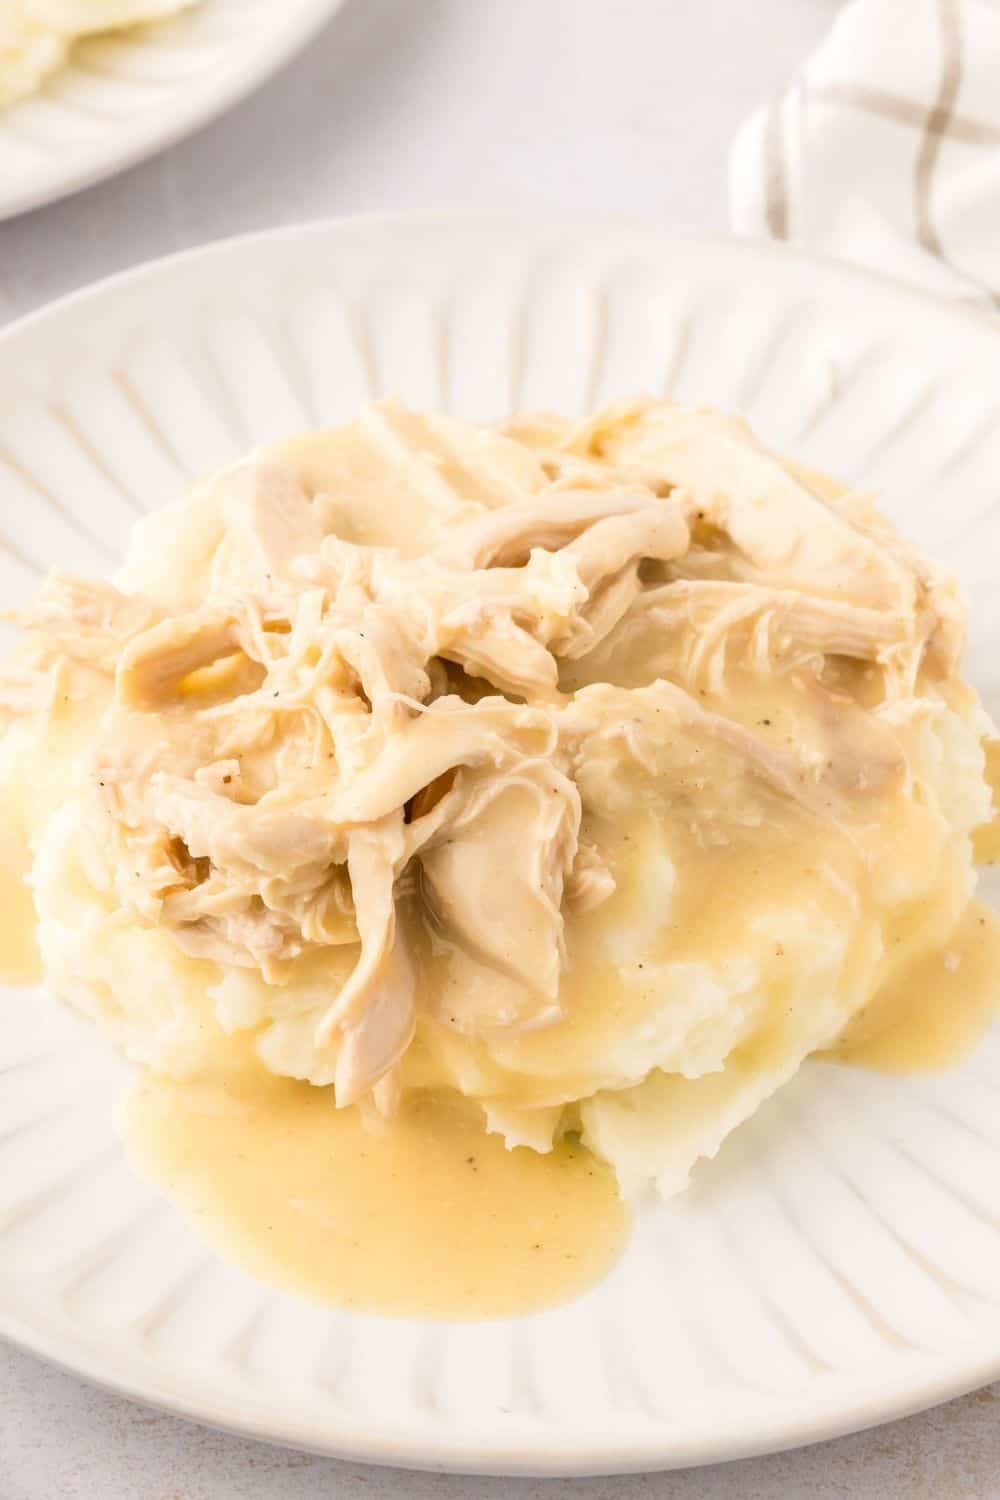 Tender chunks of chicken breast and gravy served with mashed potatoes on a white plate.